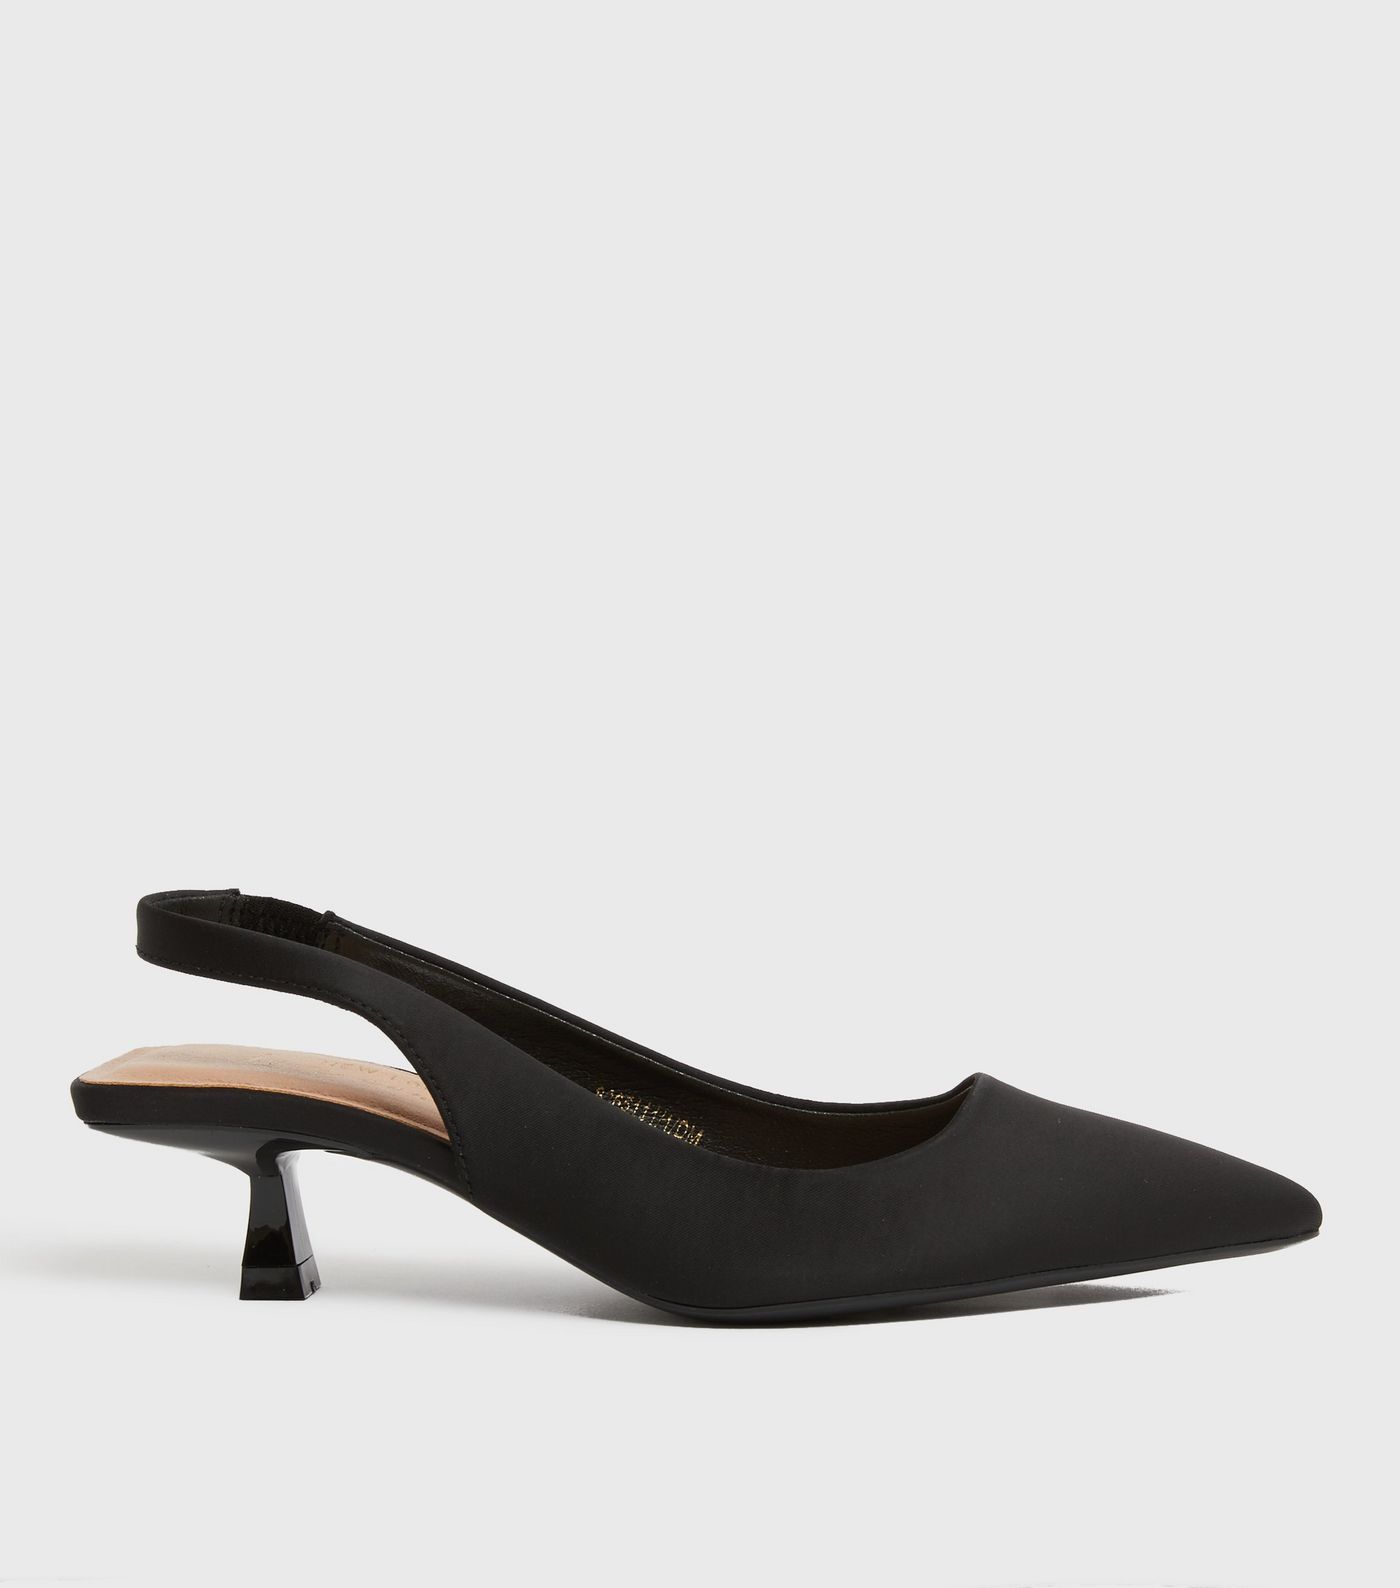 Black Satin Kitten Heel Court Shoes
						
						Add to Saved Items
						Remove from Saved Items | New Look (UK)